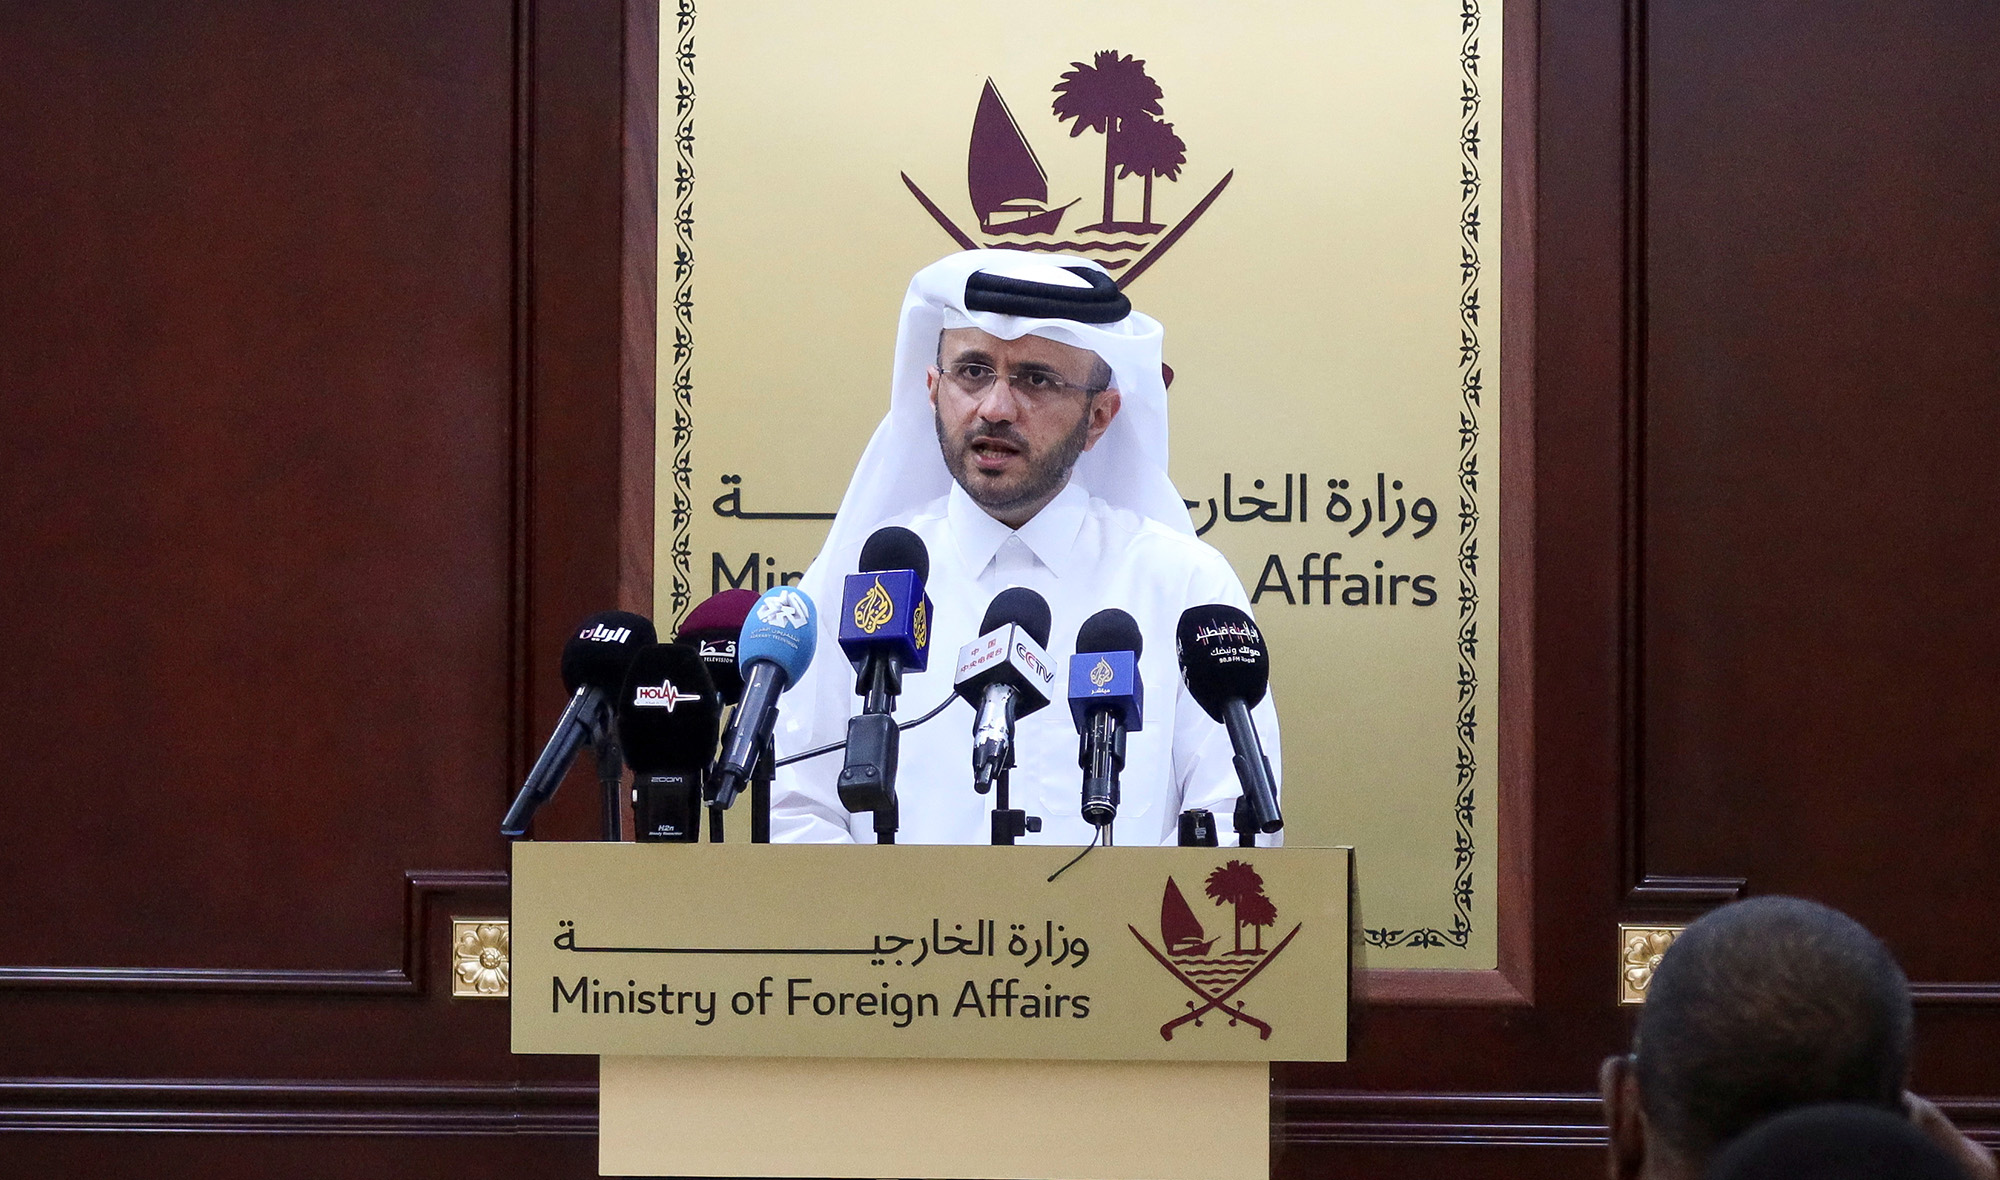 Qatar's Foreign Ministry spokesman, Majed Al-Ansari speaks during weekly press briefing at the Ministry of Foreign Affairs in Doha, Qatar, on April 23.